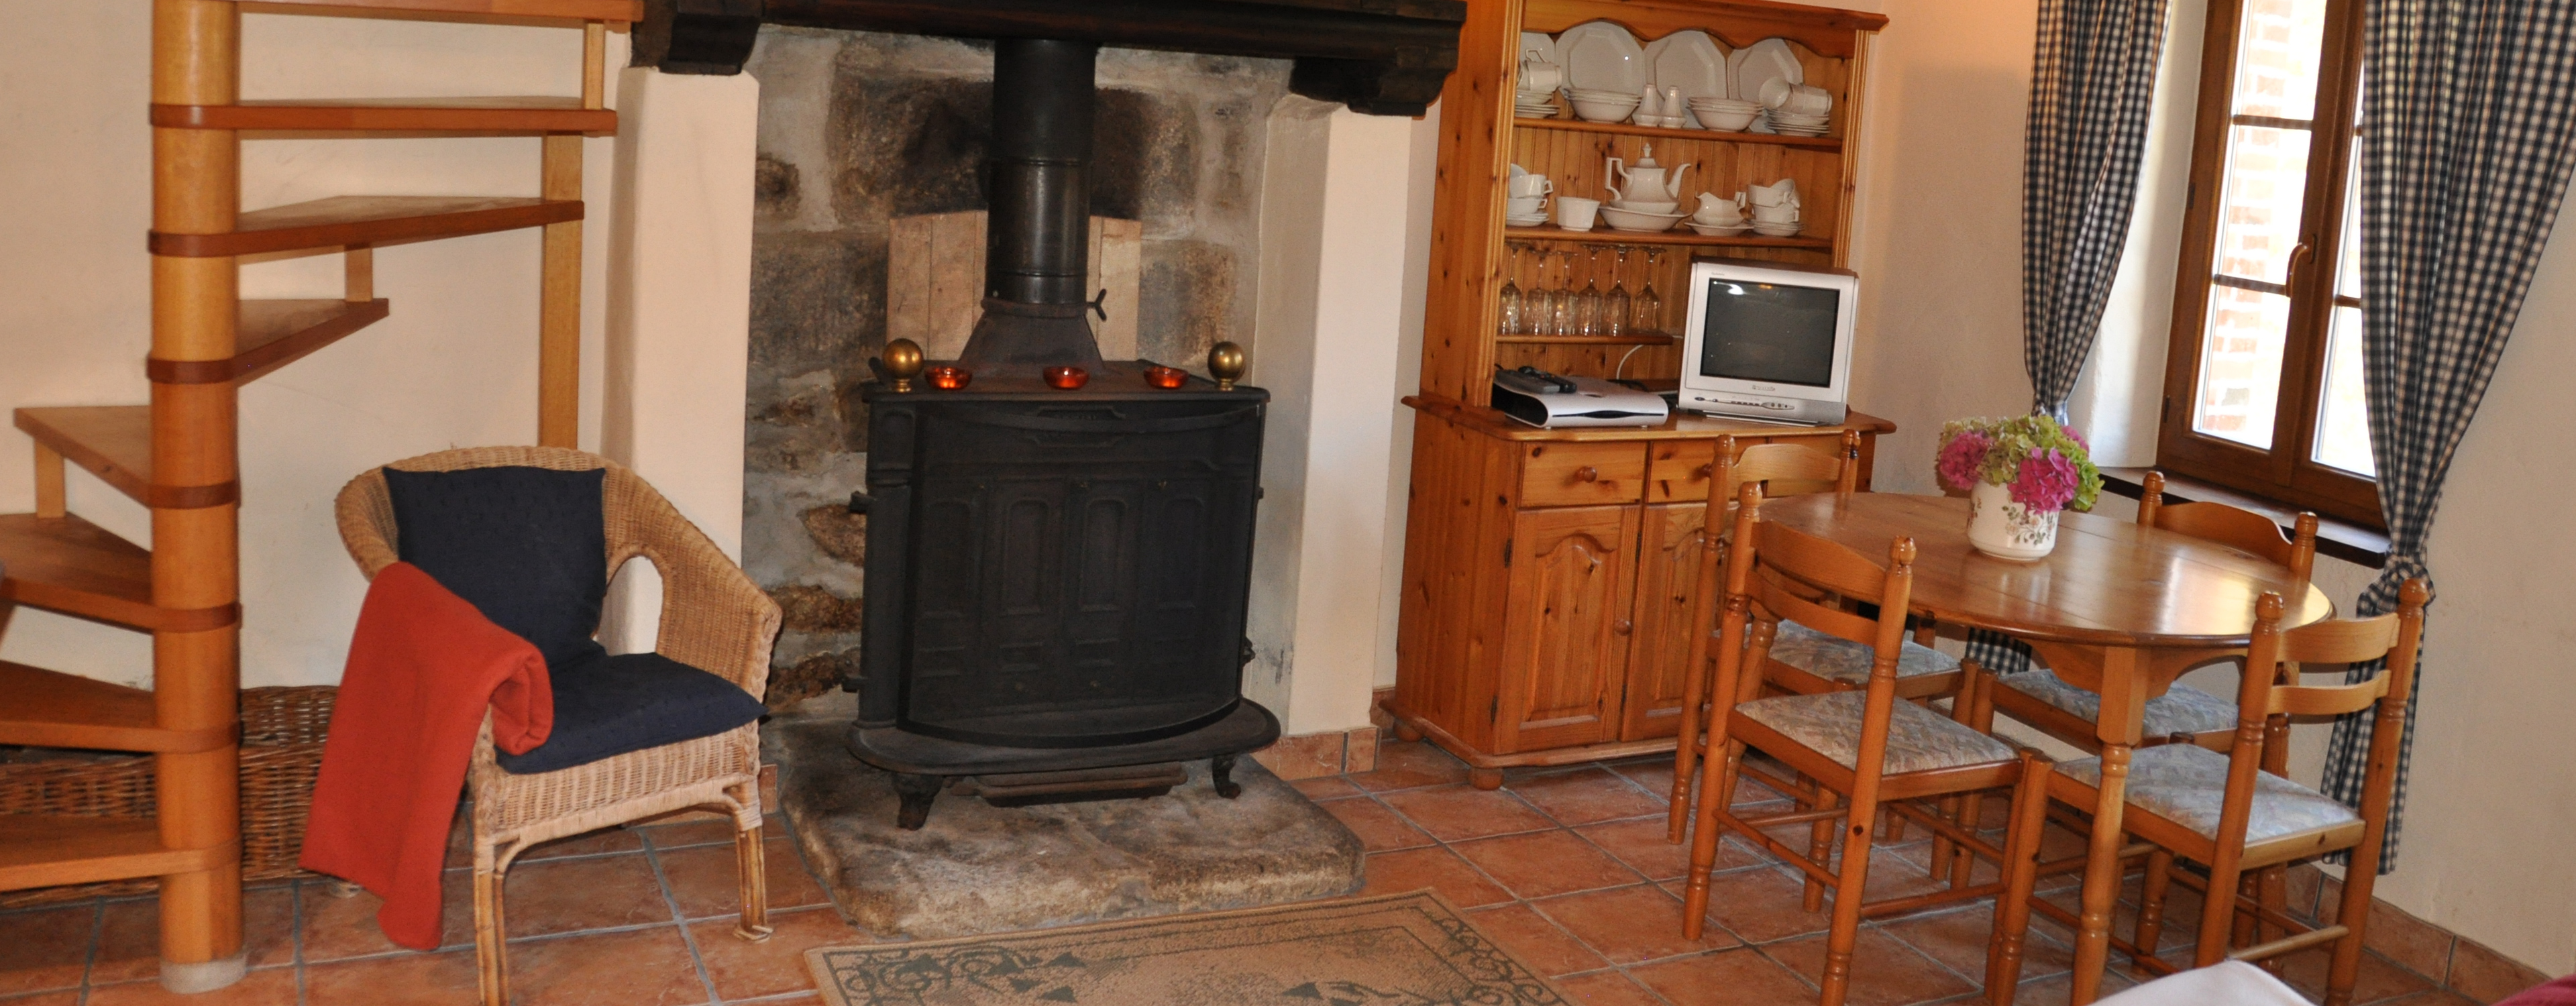 Self-contained French fishing holiday cottage at Etang de Azat-Chatenet Creuse France